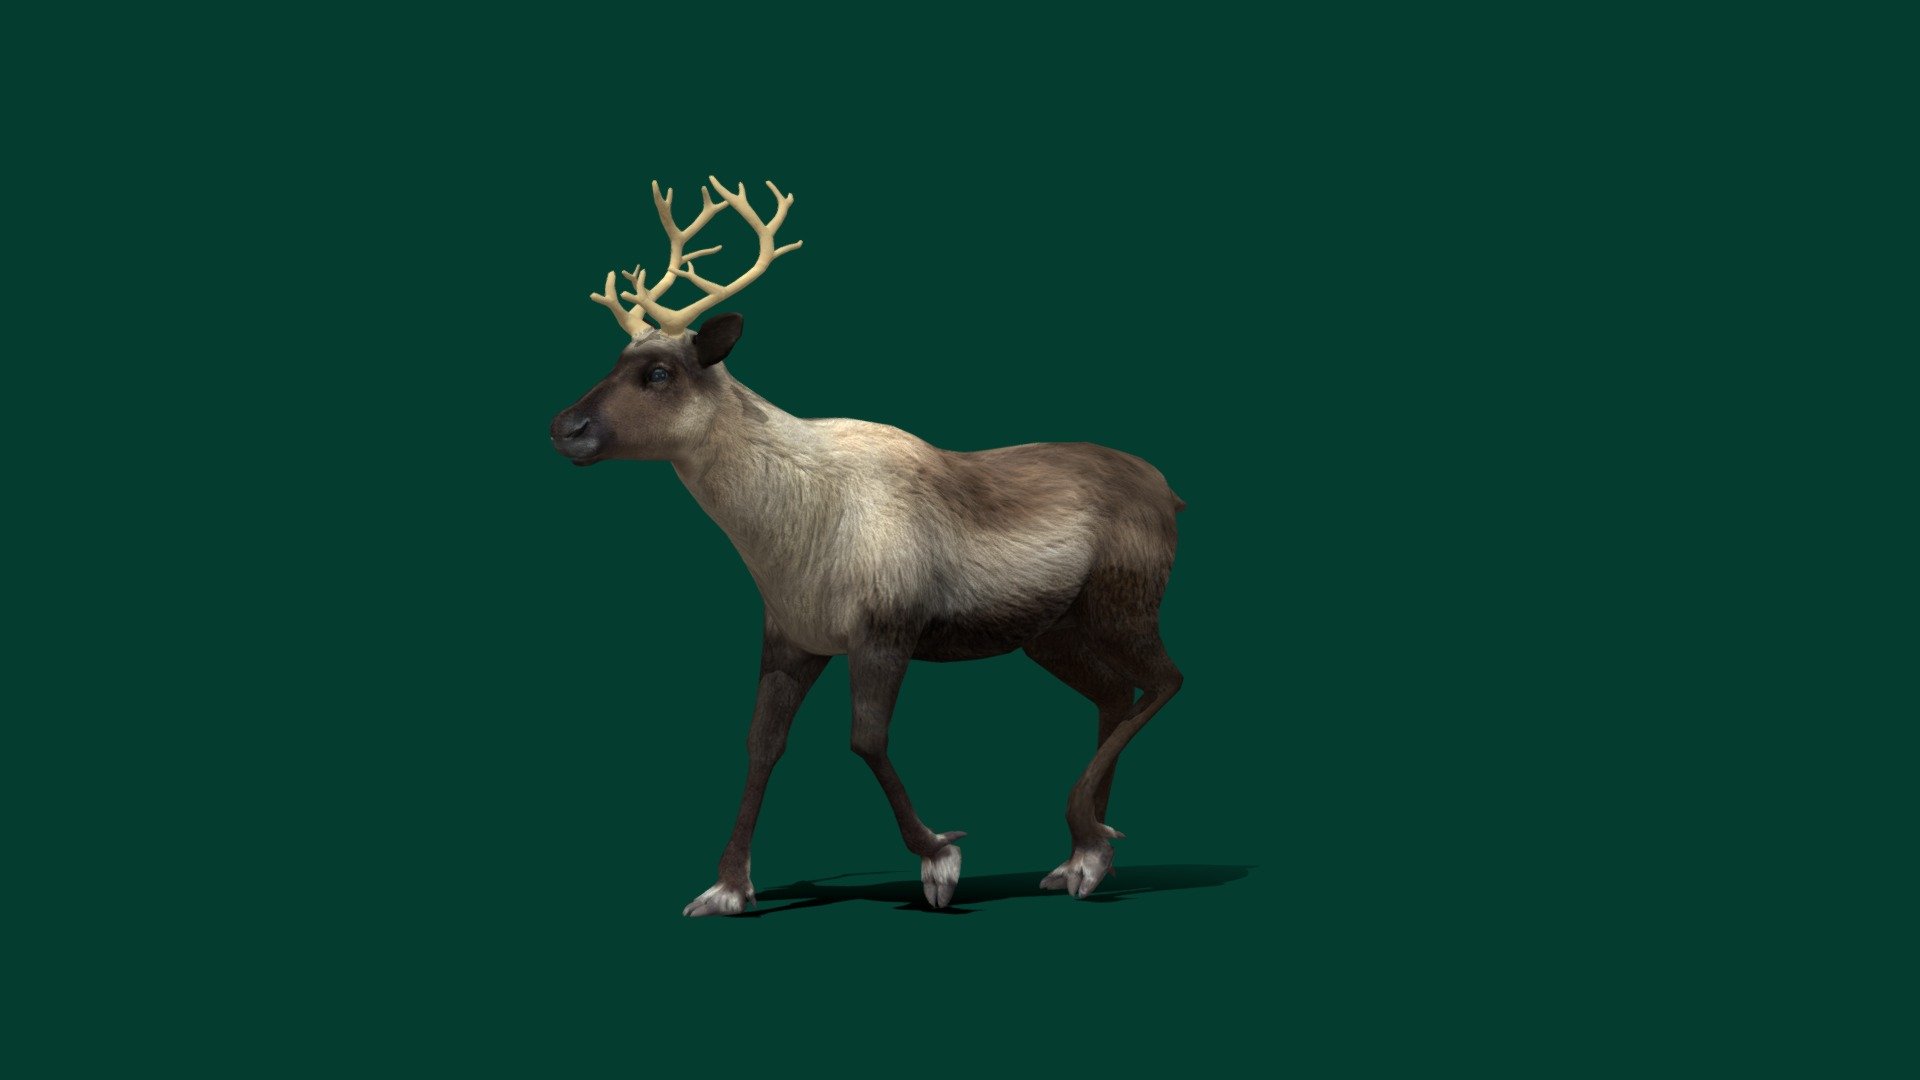 Rangifer tarandus (Caribou Reindeer)

Deer Animal Mammal  (Low poly)

1 Draw Calls

Game Ready 

13 Animations

4K PBR Textures Material

Unreal FBX

Unity FBX  

Blend File 

USDZ File (AR Ready). Real Scale Dimension

Textures Files

GLB File

Gltf File ( Spark AR, Lens Studio(SnapChat) , Effector(Tiktok) , Spline, Play Canvas ) Compatible

Triangles: 9112

Vertices: 4581

Diffuse , Metallic, Roughness , Normal Map ,AO ,Specular Map

The reindeer or caribou is a species of deer with circumpolar distribution, native to Arctic, subarctic, tundra, boreal, and mountainous regions of Northern Europe, Siberia, and North America. This includes both sedentary and migratory populations. It is the only representative of the genus Rangifer. 
Class: Mammalia
Family: Cervidae
Order: Artiodactyla
Phylum: Chordata - Caribou Reindeer (Lowpoly) - 3D model by Nyilonelycompany 3d model